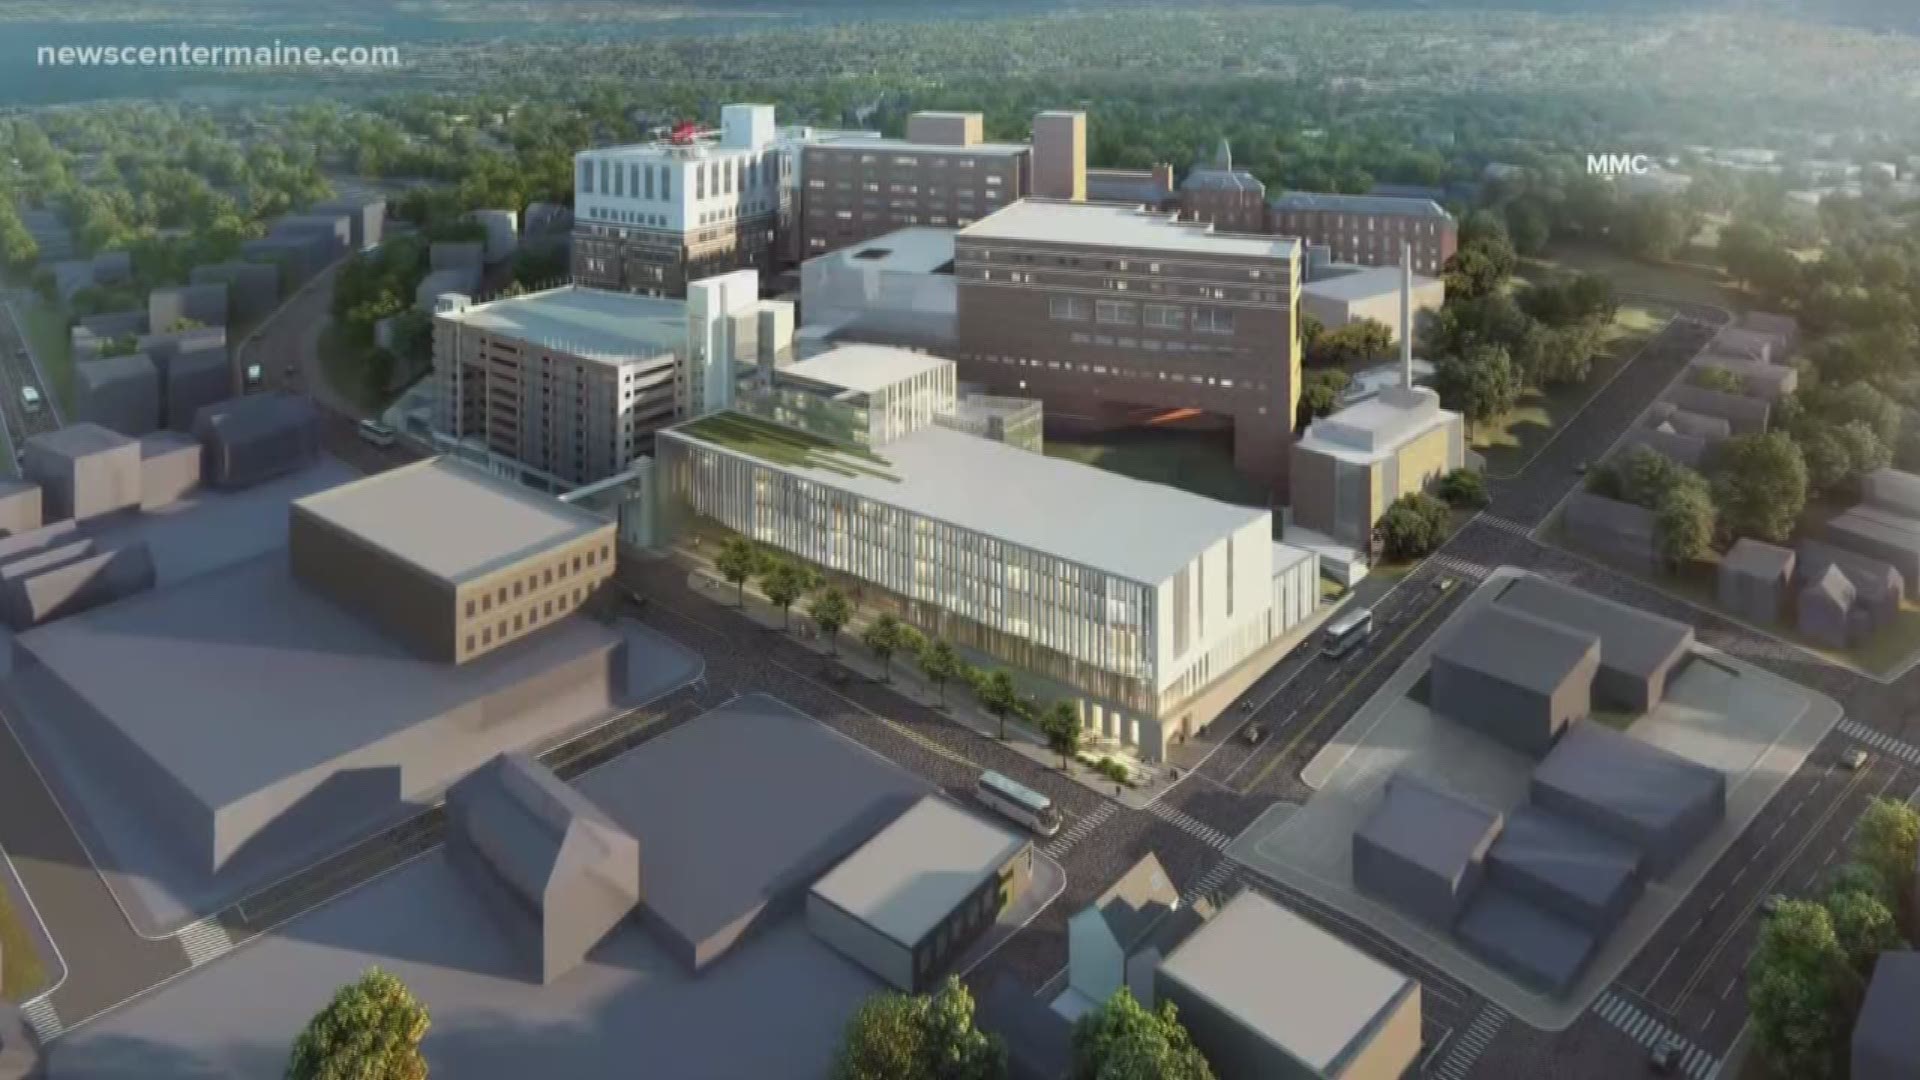 Maine Medical Center will receive $4M donation